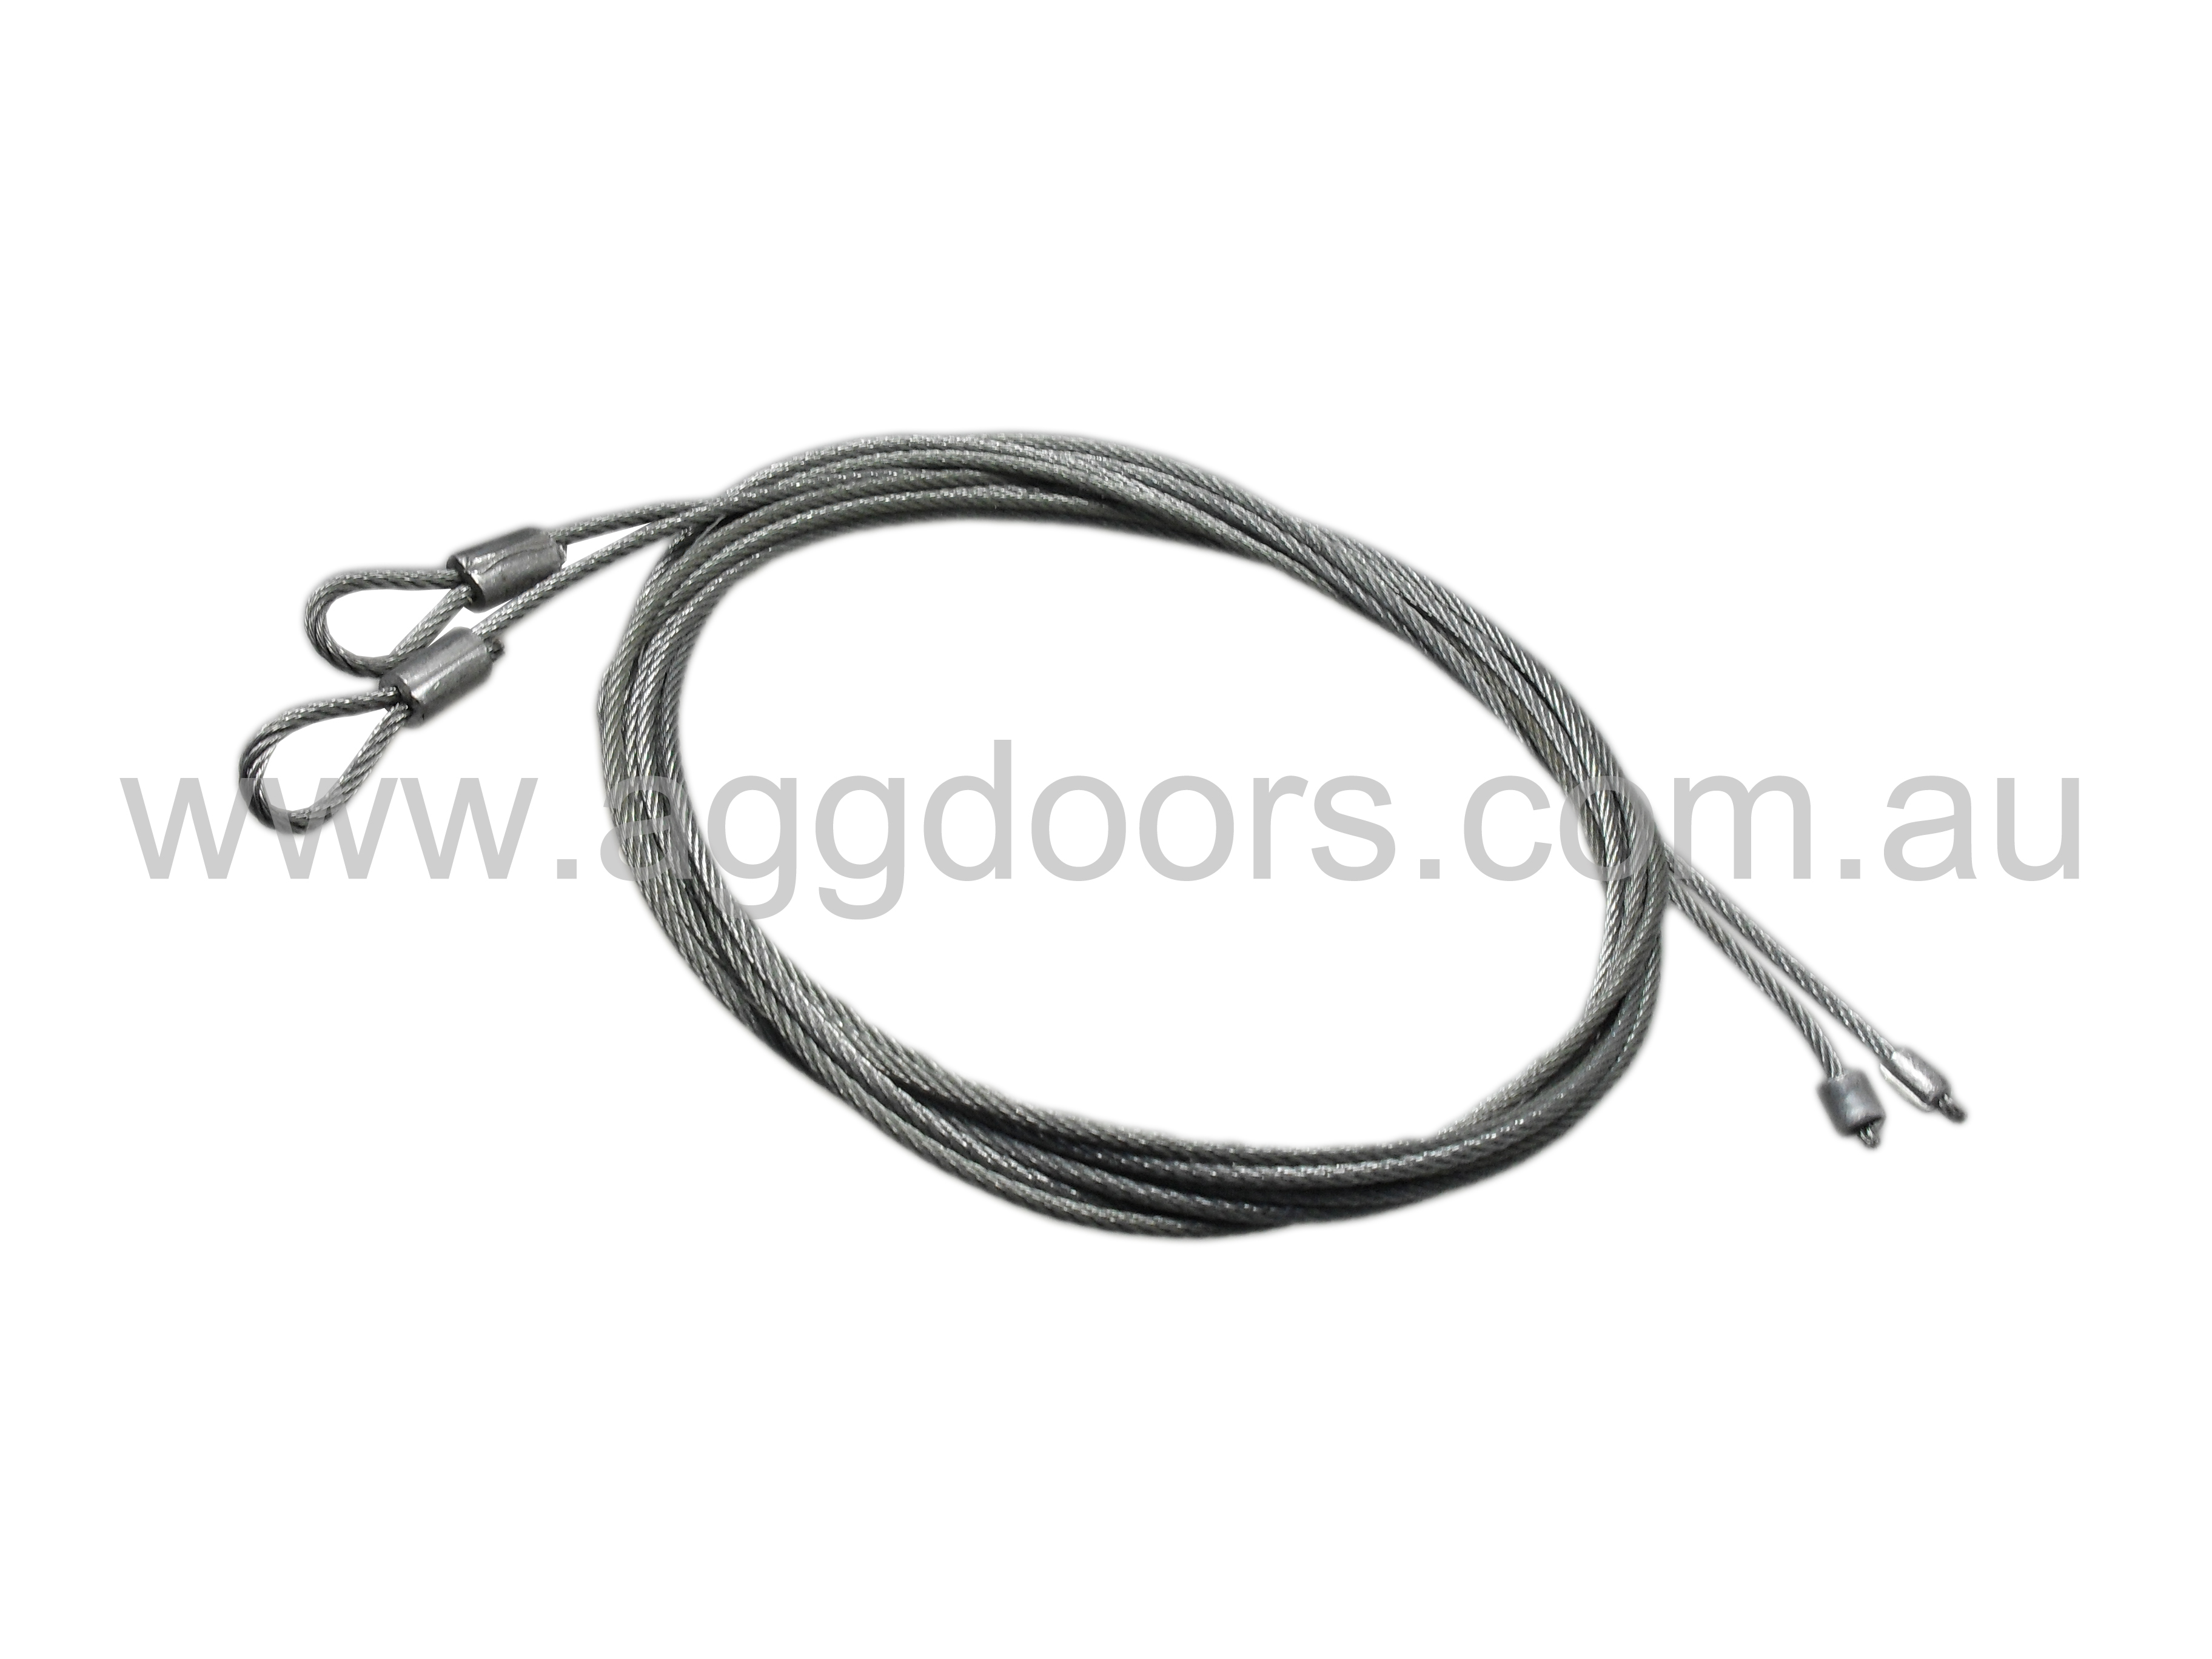 Panel Door Pulley Cable